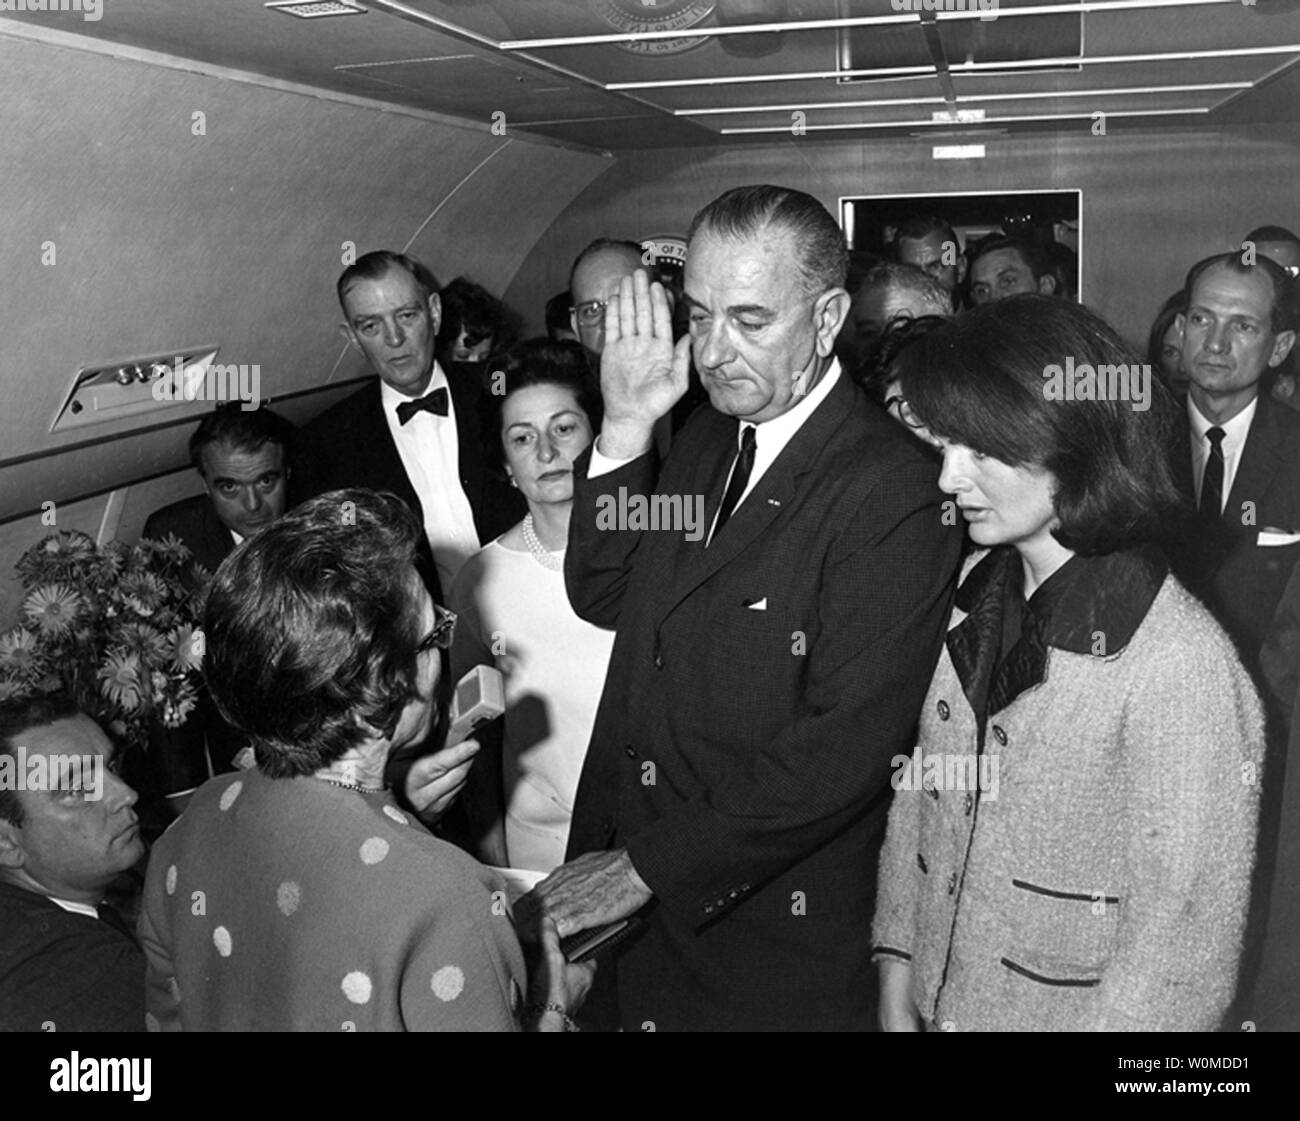 Judge Sarah T. Hughes administers the Presidential Oath of Office to Lyndon Baines Johnson aboard Air Force One, after President John F. Kennedy was assassinated, at Love Field in Dallas Texas on November 22, 1963. Mrs. Johnson, Mrs. Kennedy, Jack Valenti, Rep. Albert Thomas, Rep. Jack Brooks, Associate Press Secretary Malcolm Kilduff (holding microphone) and others witnesses attend. November 22, 2008 marks the 45th anniversary of the day President Kennedy was assassinated in Dallas, Texas. (UPI Photo/Cecil Stoughton/John F. Kennedy Presidential Library & Museum) Stock Photo